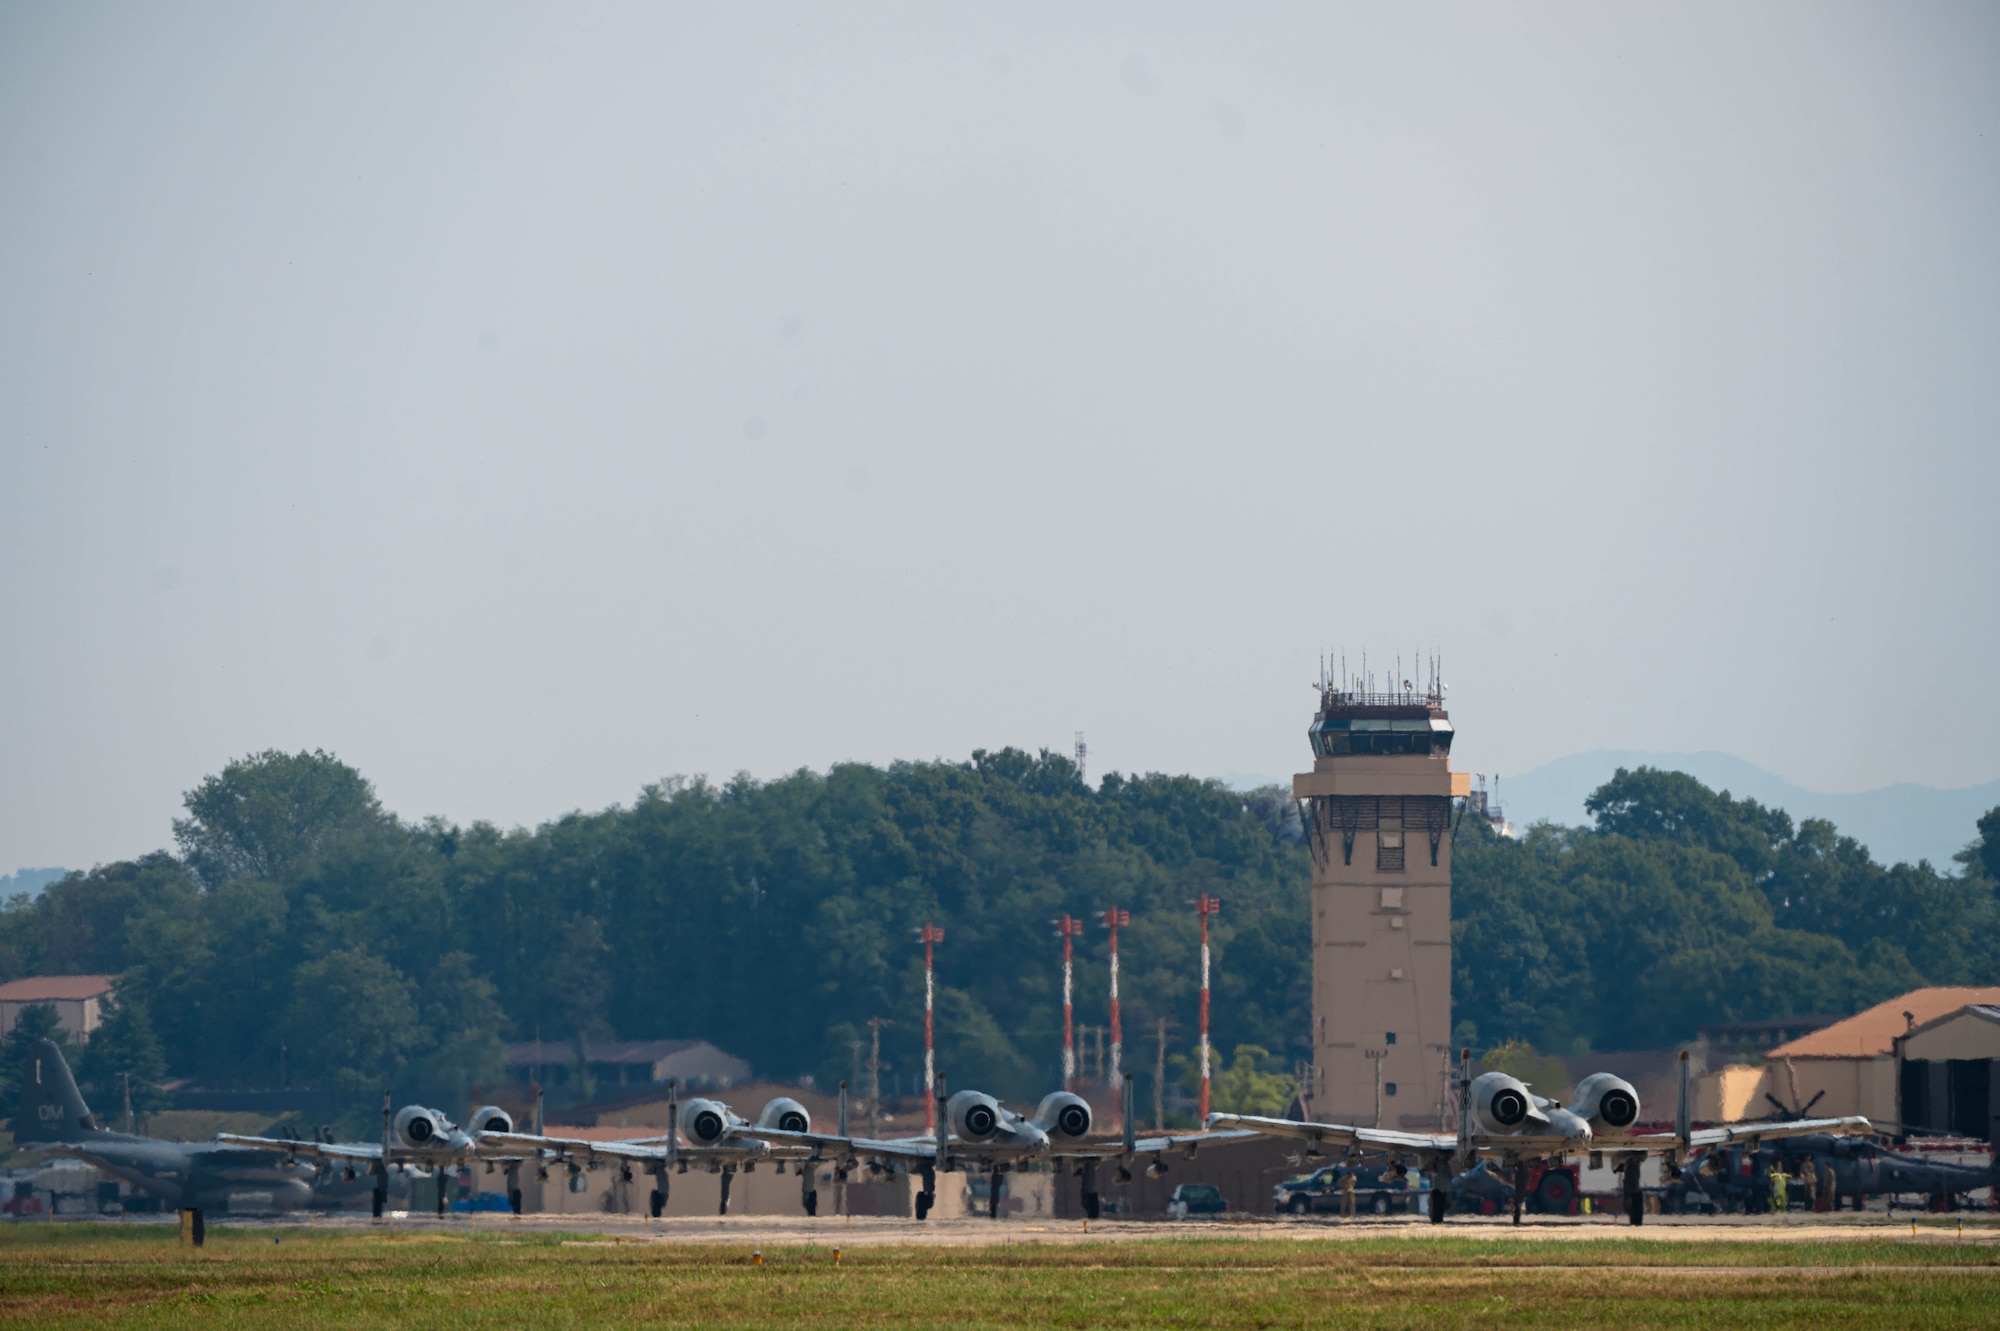 Four A-10 Thunderbolt II “Warthog’s” taxi down the runway.